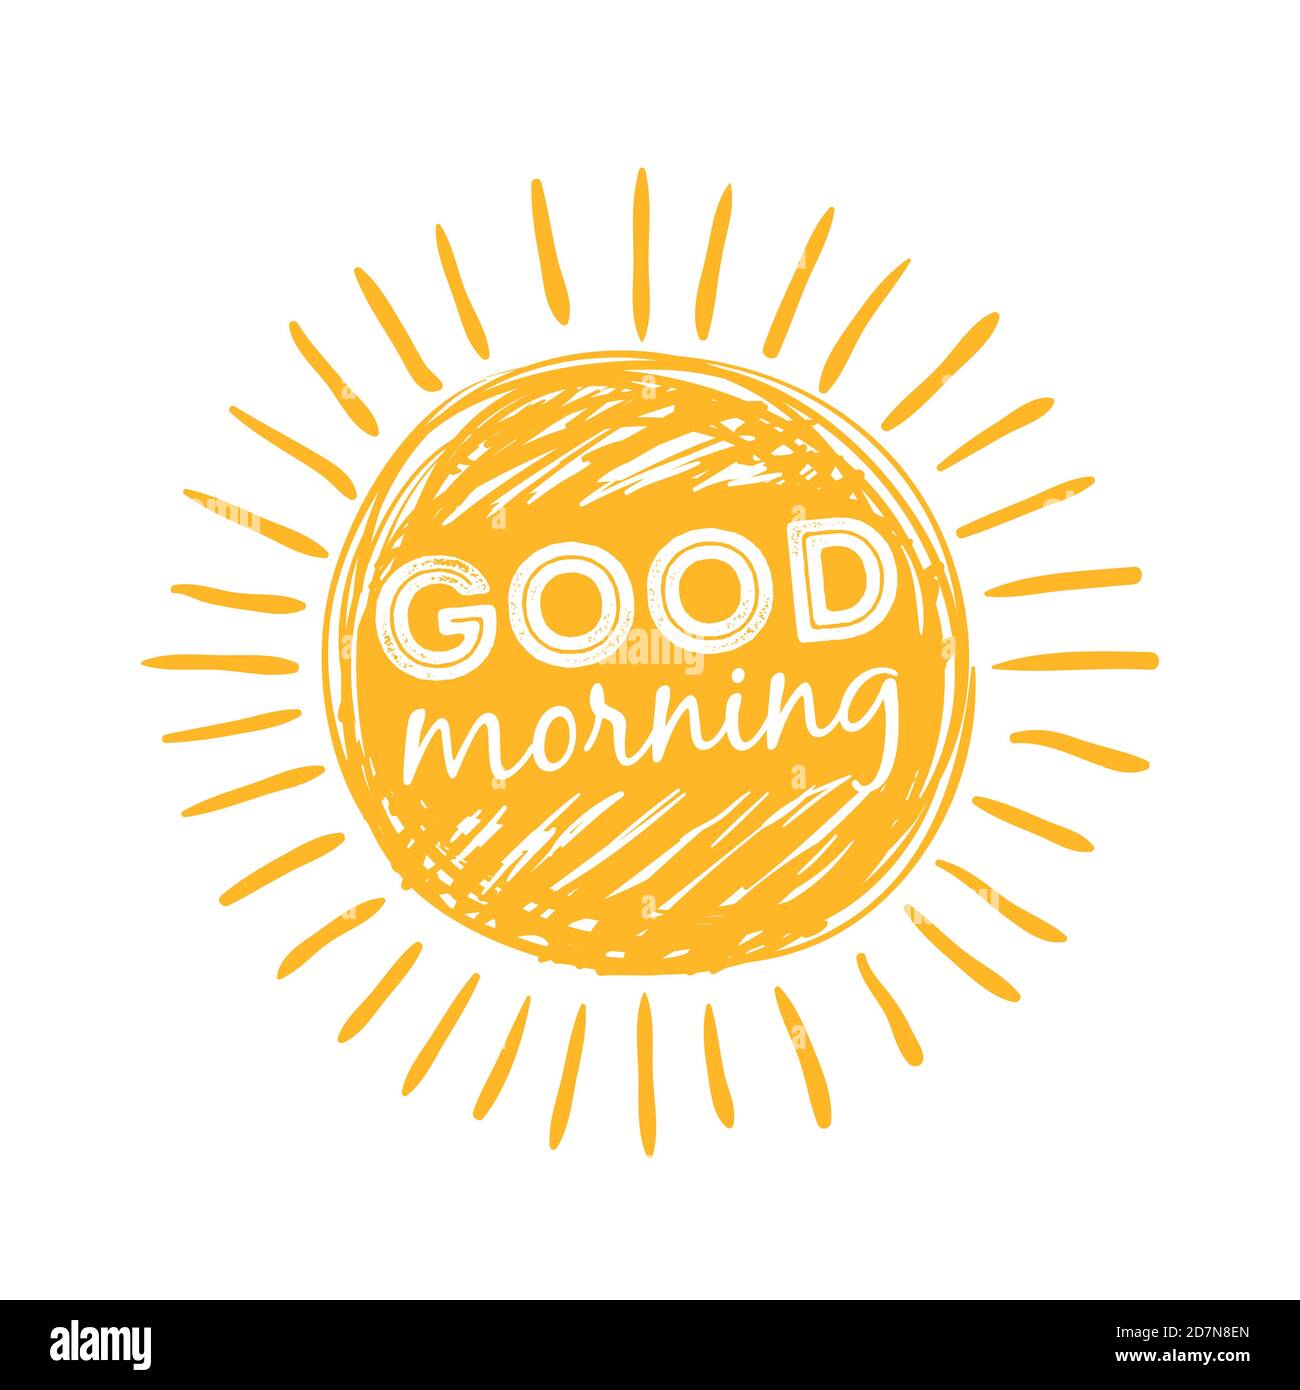 Good morning sun. Sunshine symbol with happy morning lettering typography. Vector illustration. Good morning lettering, handwritten motivation Stock Vector